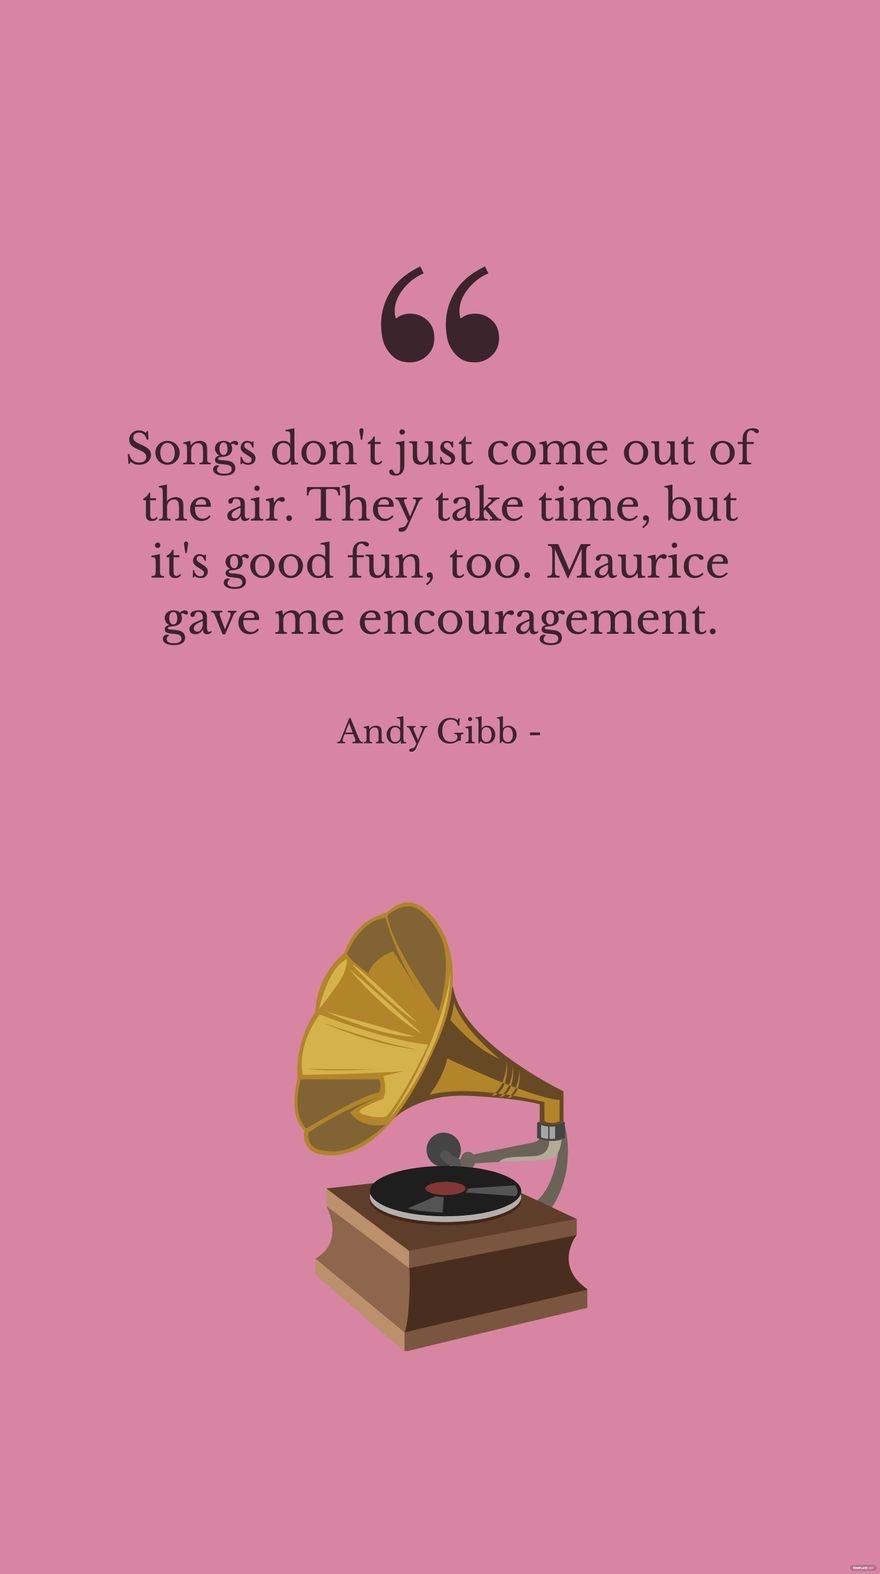 Free Andy Gibb - Songs don't just come out of the air. They take time, but it's good fun, too. Maurice gave me encouragement. Template